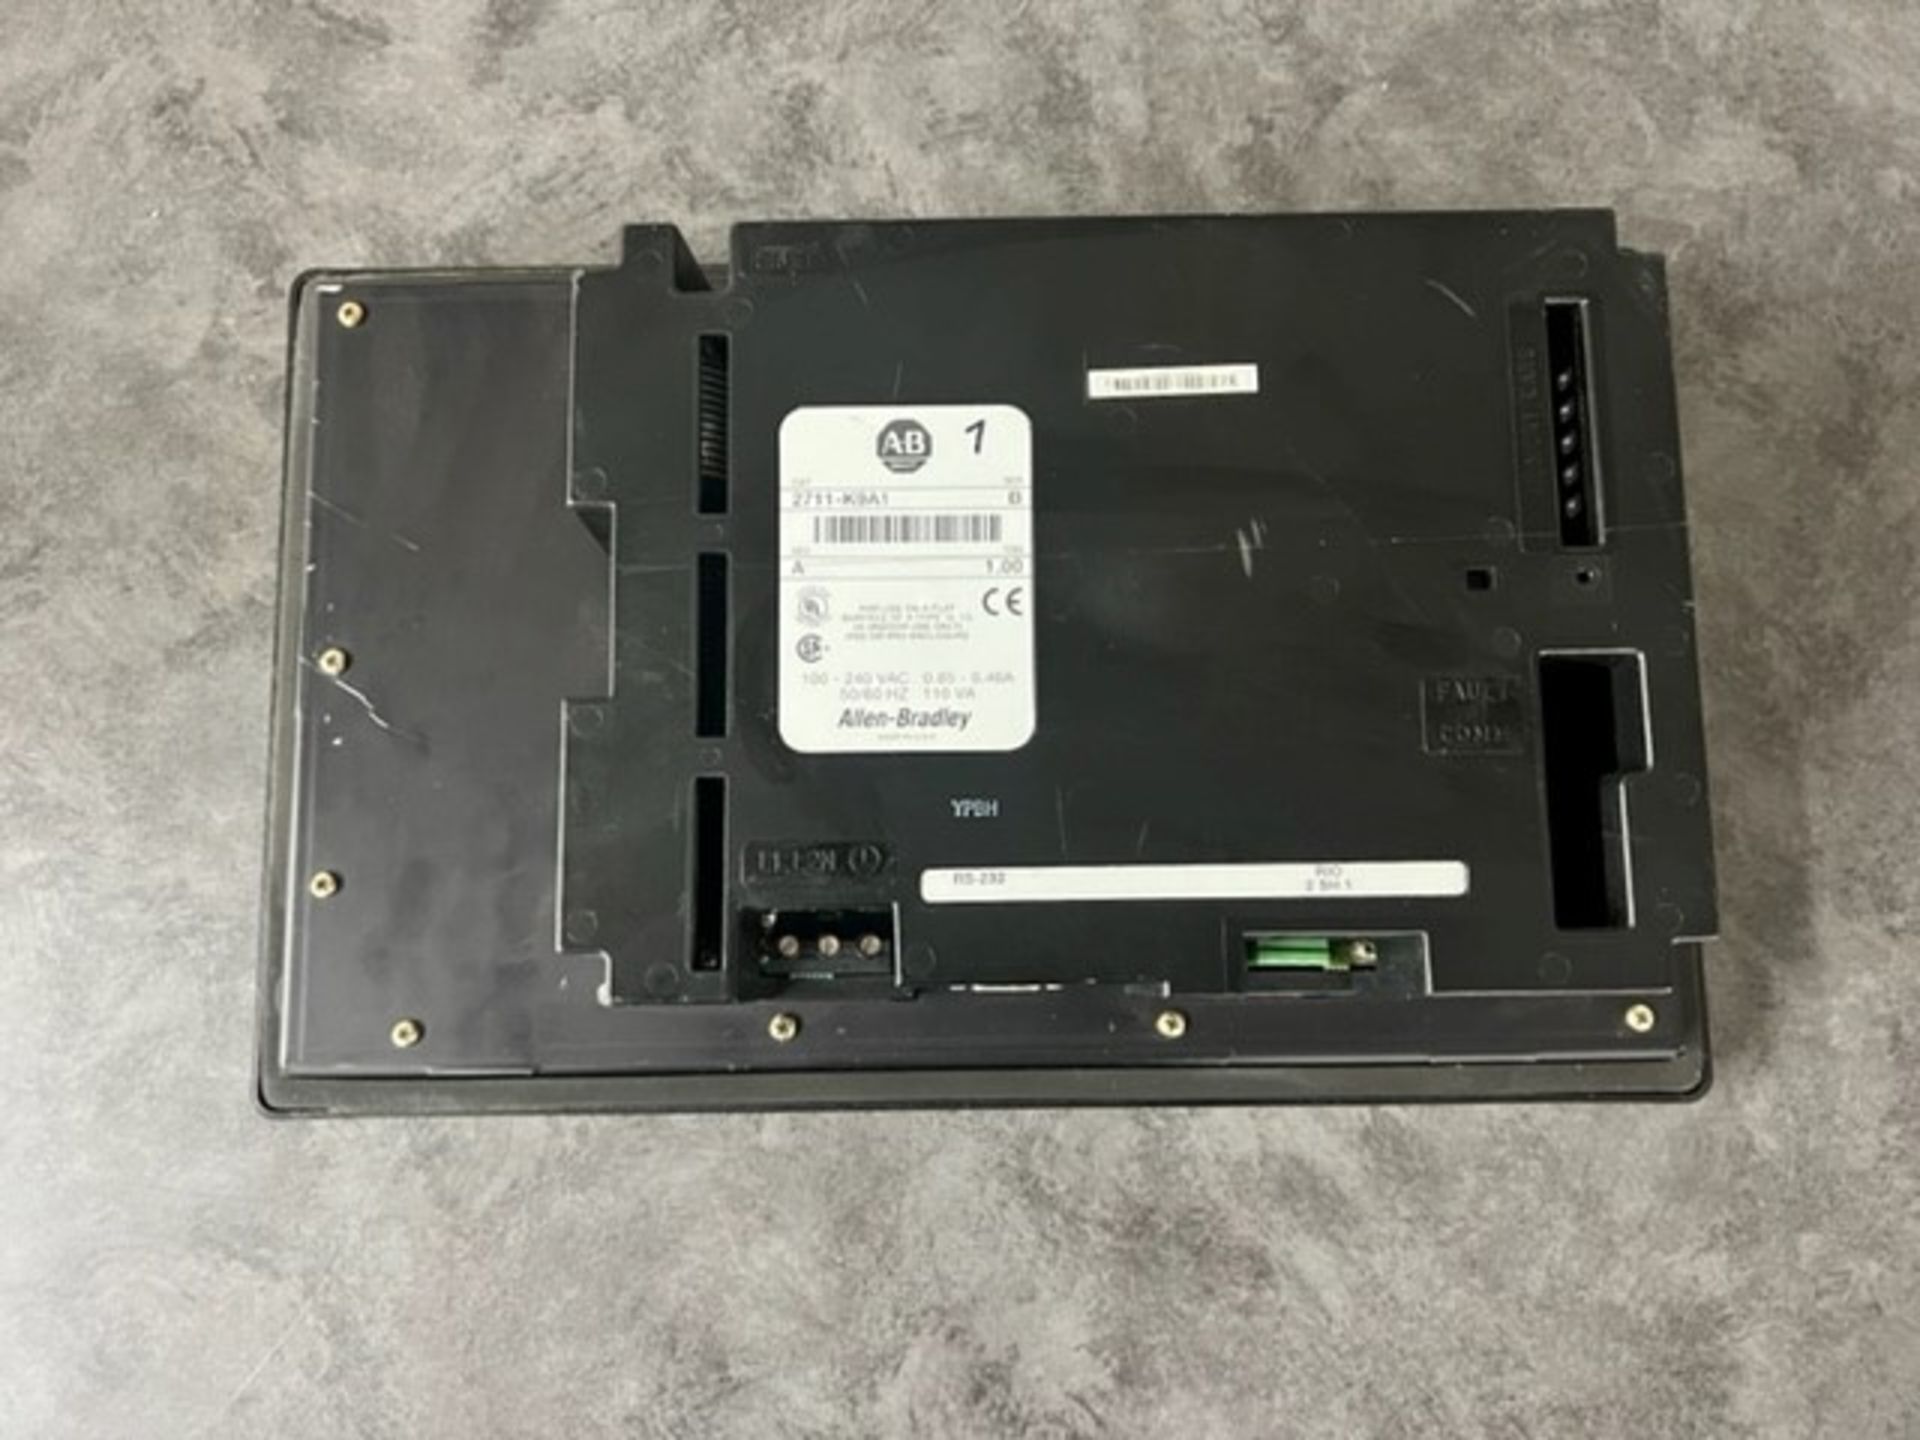 Allen Bradley PanelView 900 Touchpad Display, Cat #2711-K9A1 (Load Fee $50) (Located Harrodsburg, - Image 2 of 2